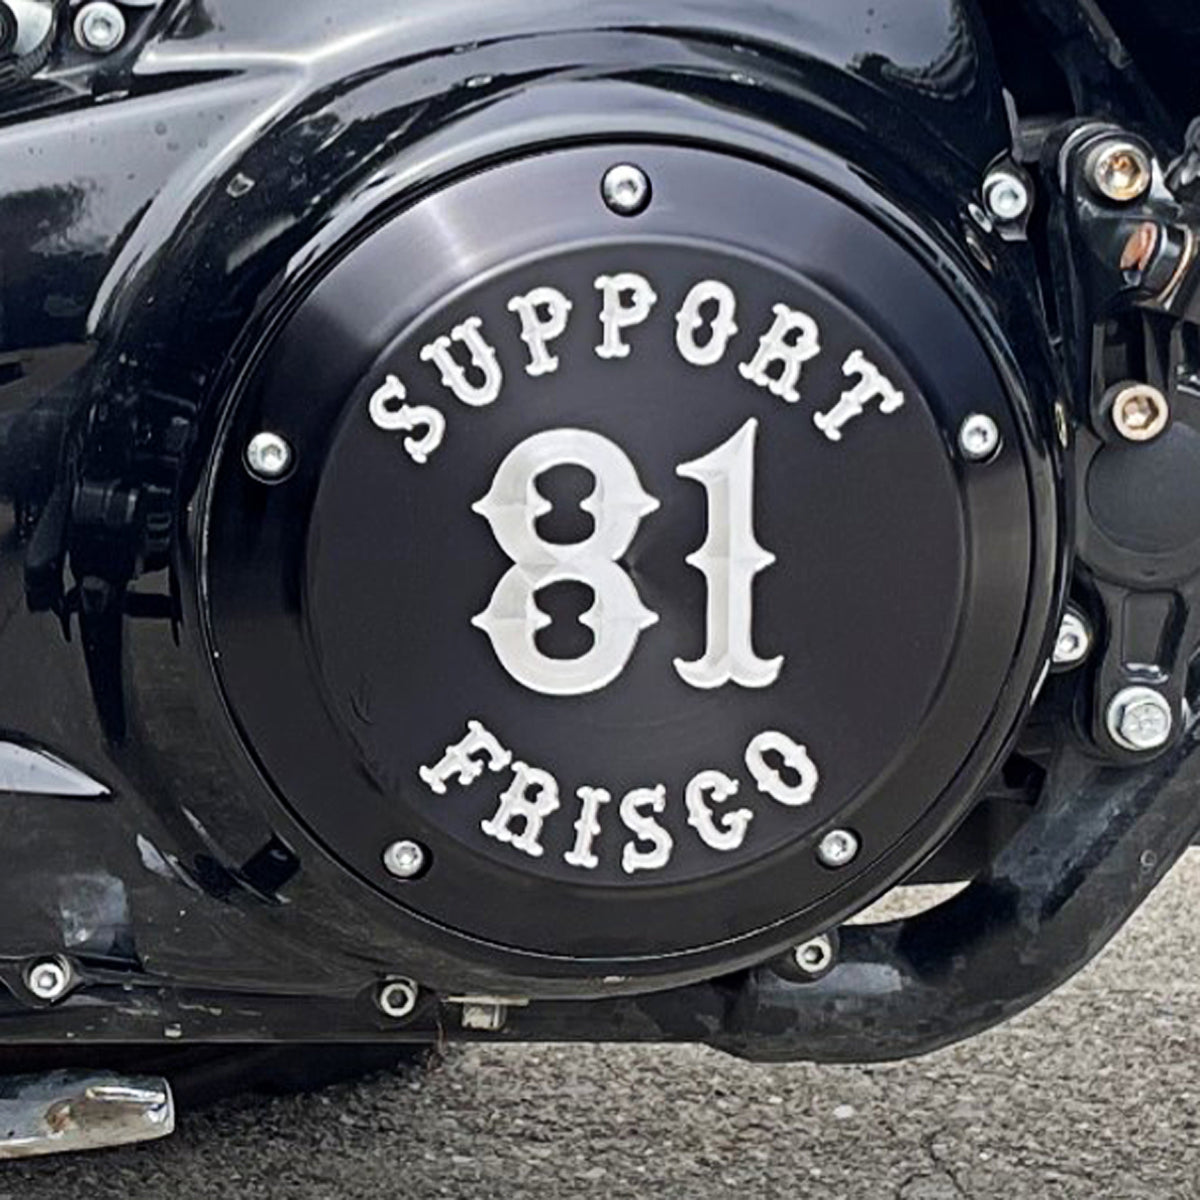 Derby Covers - Support 81 Frisco